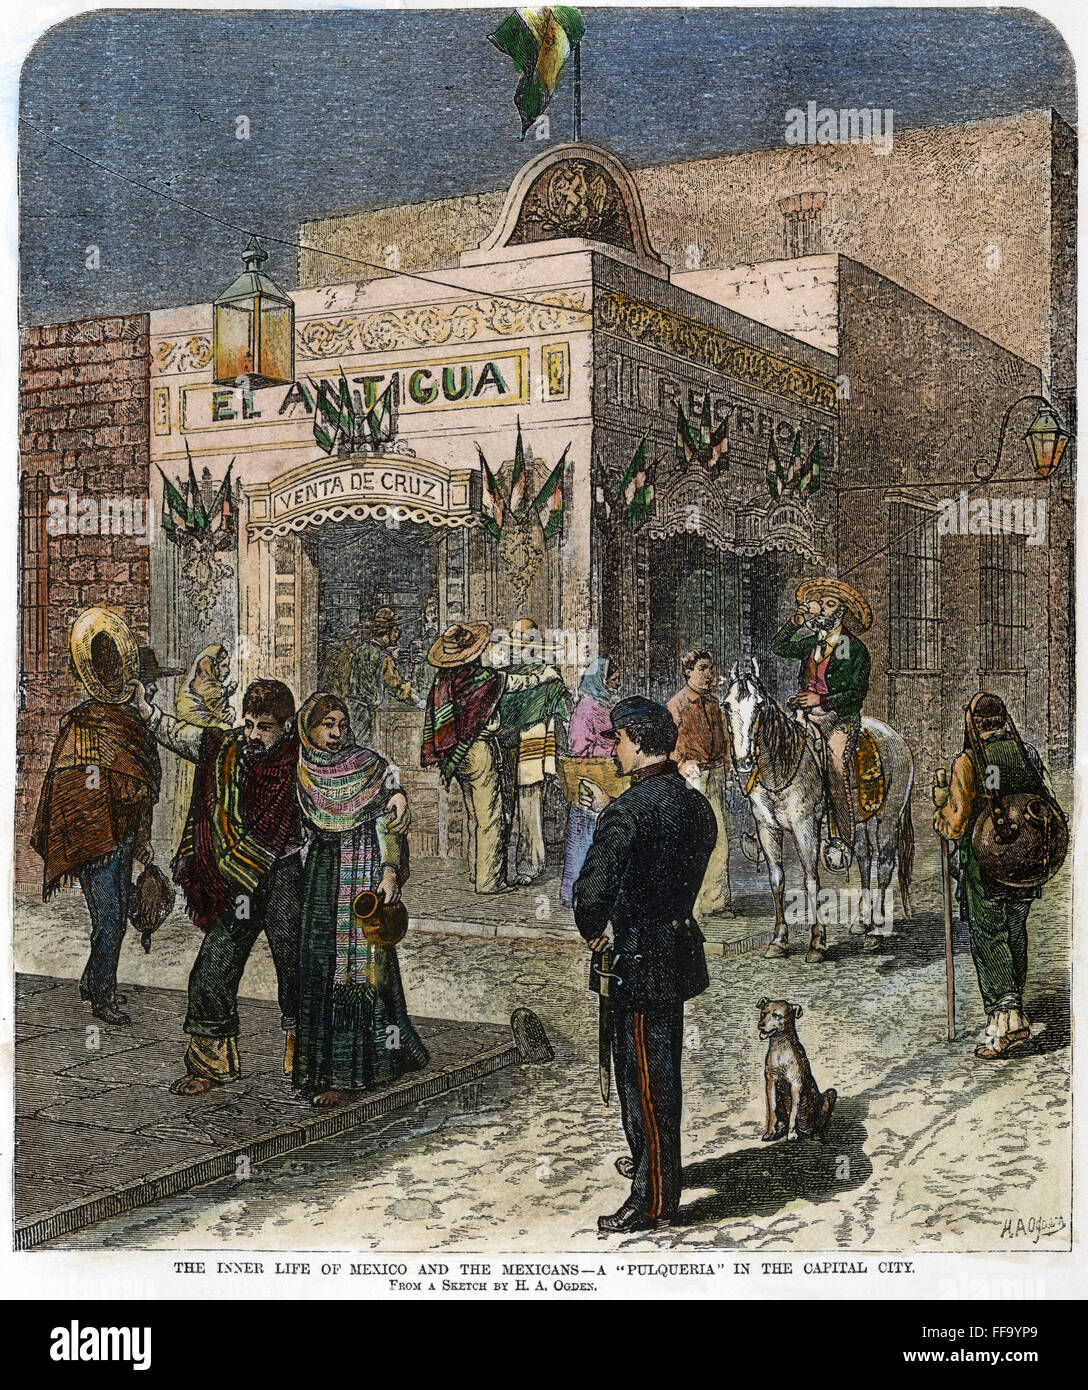 MEXICO CITY, 1881. /nA pulqueria in Mexico City. Wood engraving, American, 1881. Stock Photo